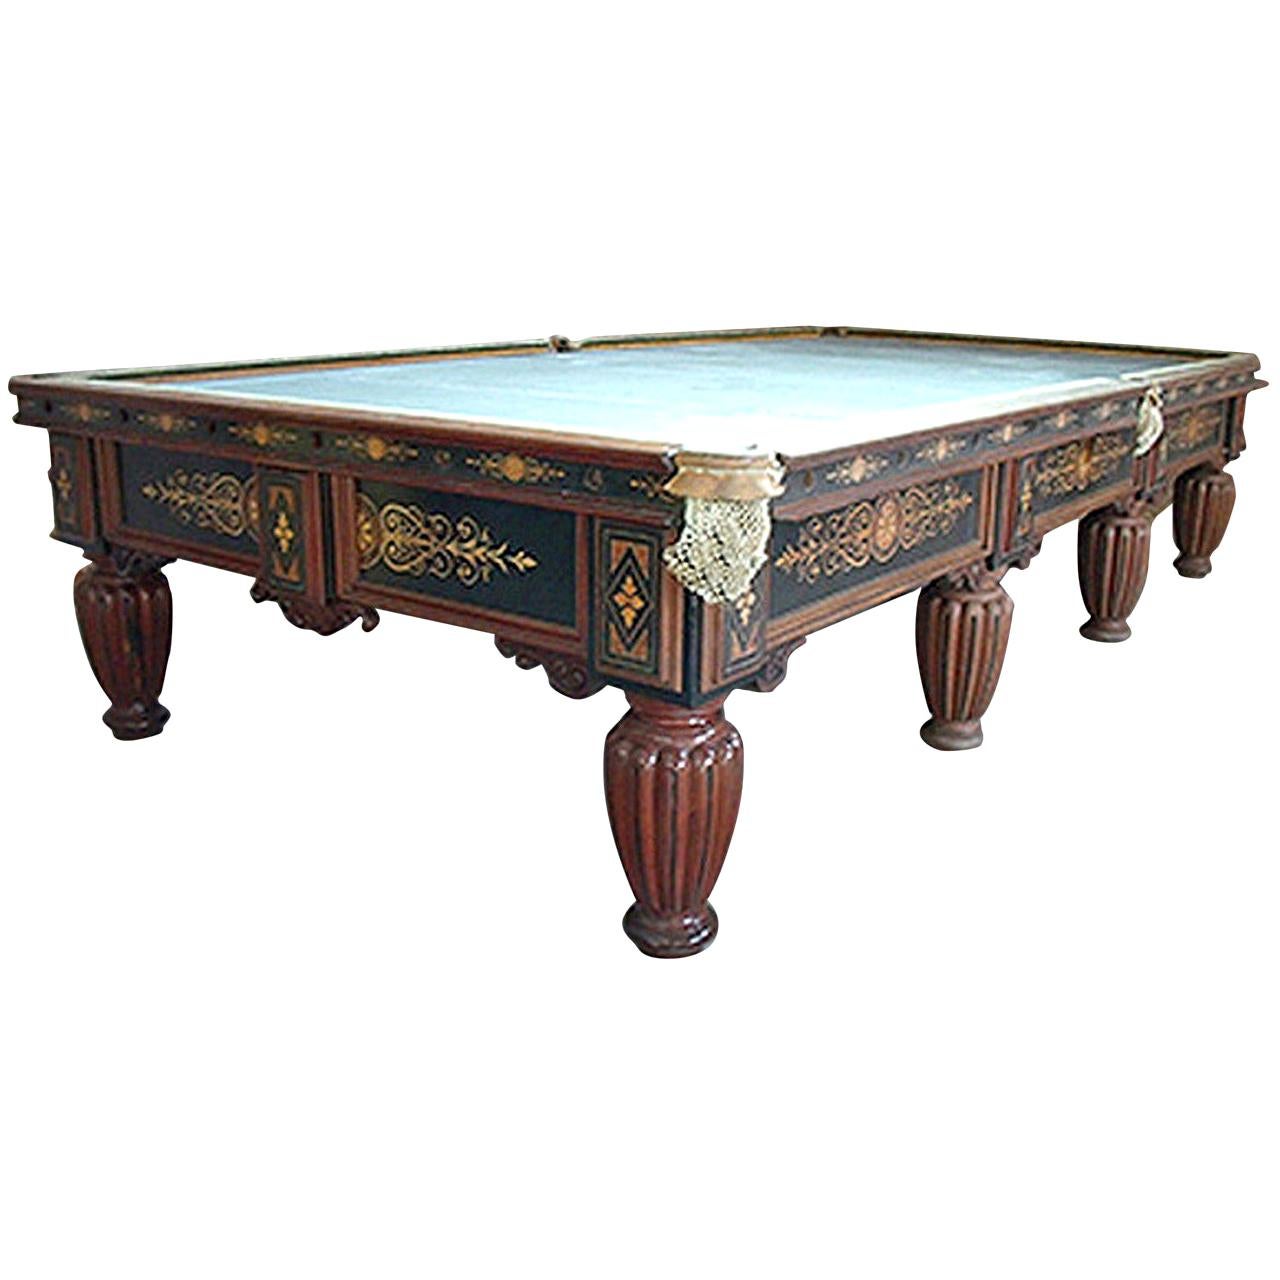 Billiard Snooker POOL Table Carved and Inlaid Walnut, Cox & Yeman of London